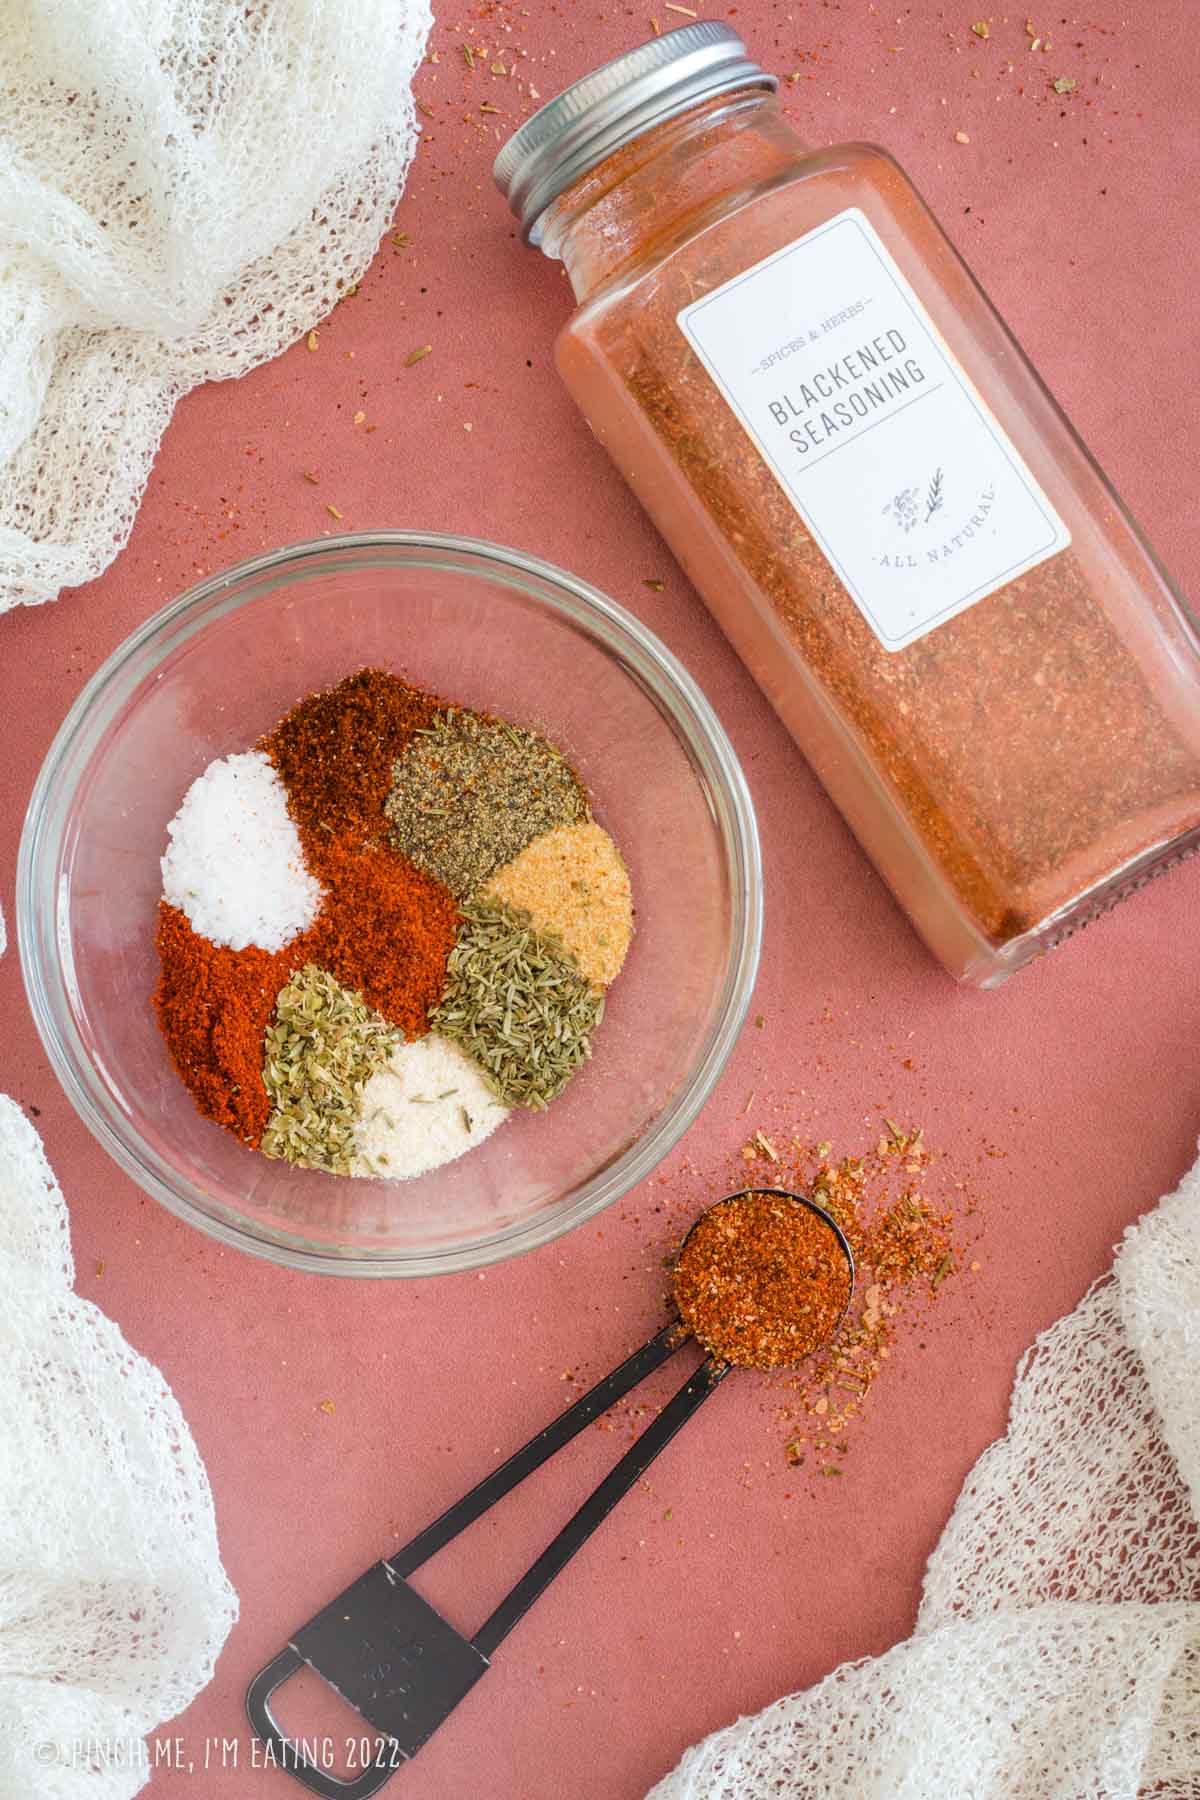 Ingredients for blackened seasoning in a glass bowl alongside a spice jar of already-mixed homemade blackened seasoning.